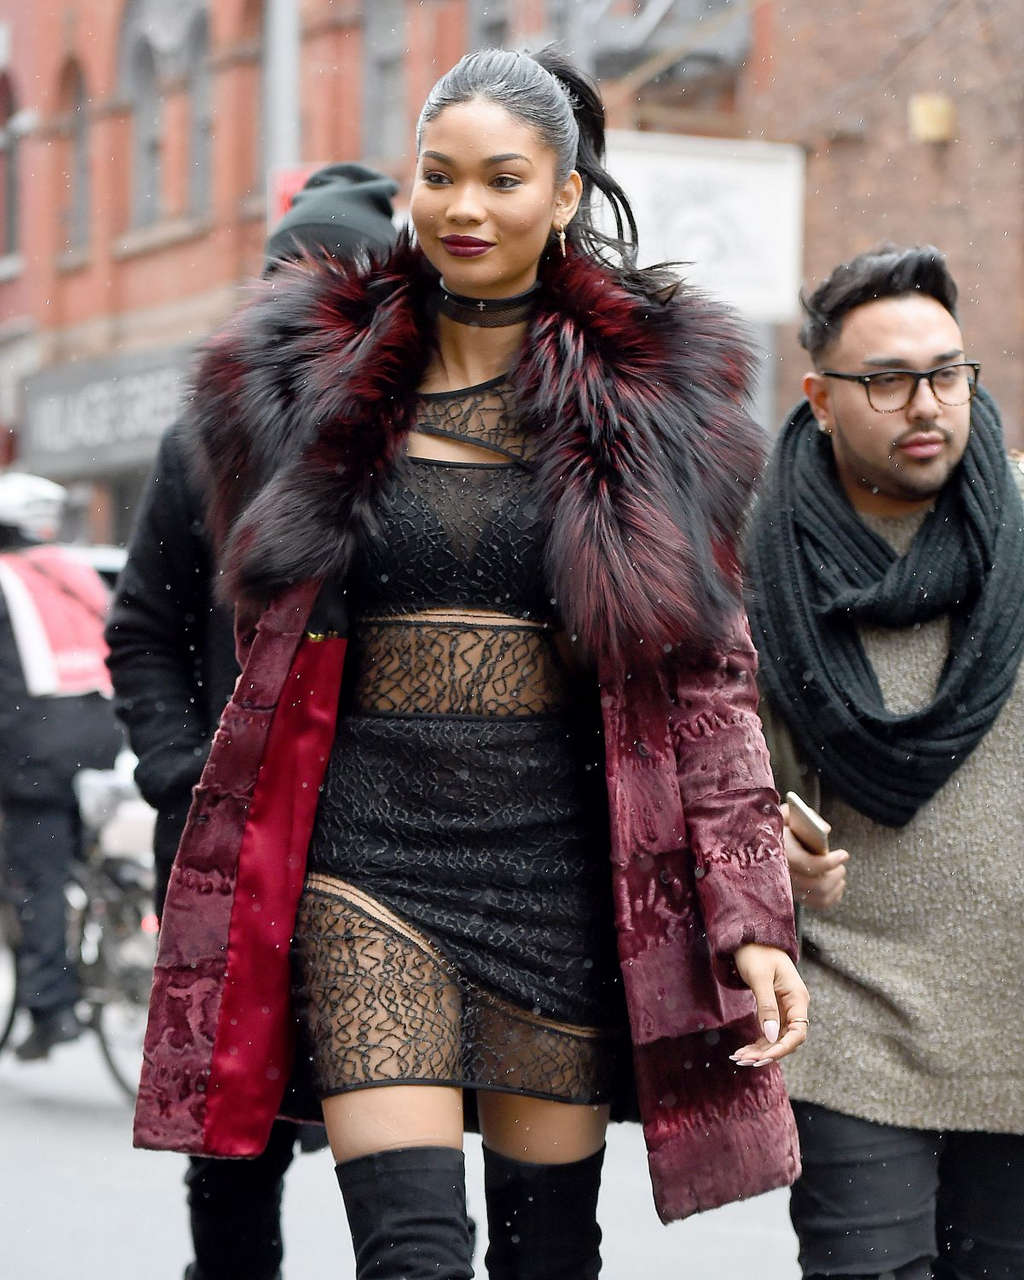 Chanel Iman Out About New York